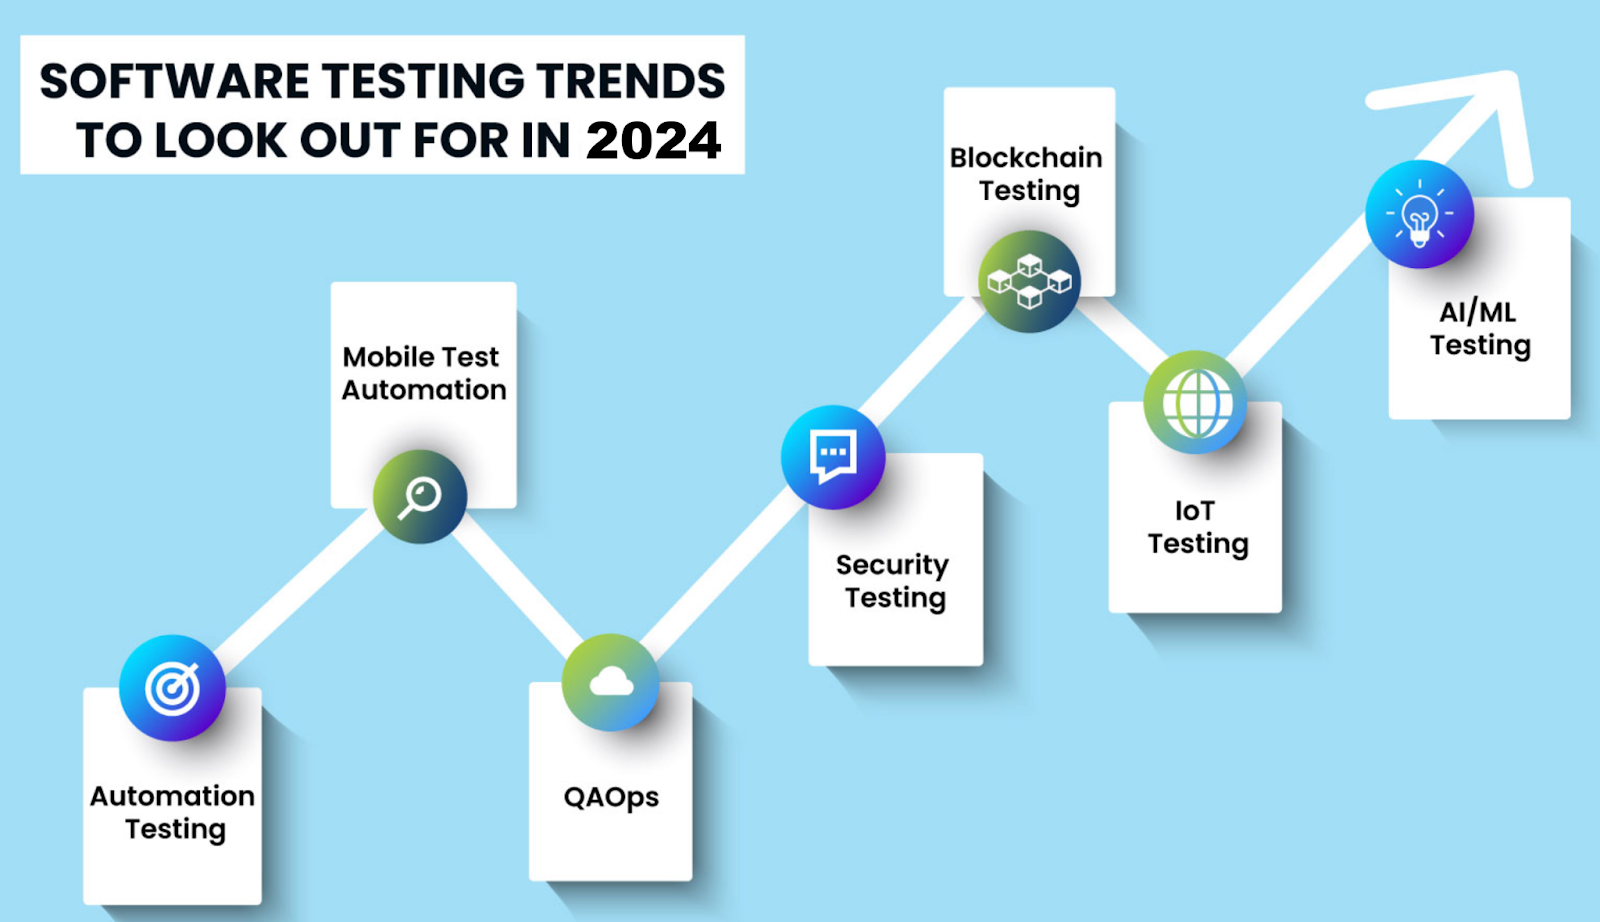 Software testing trends to look out for 